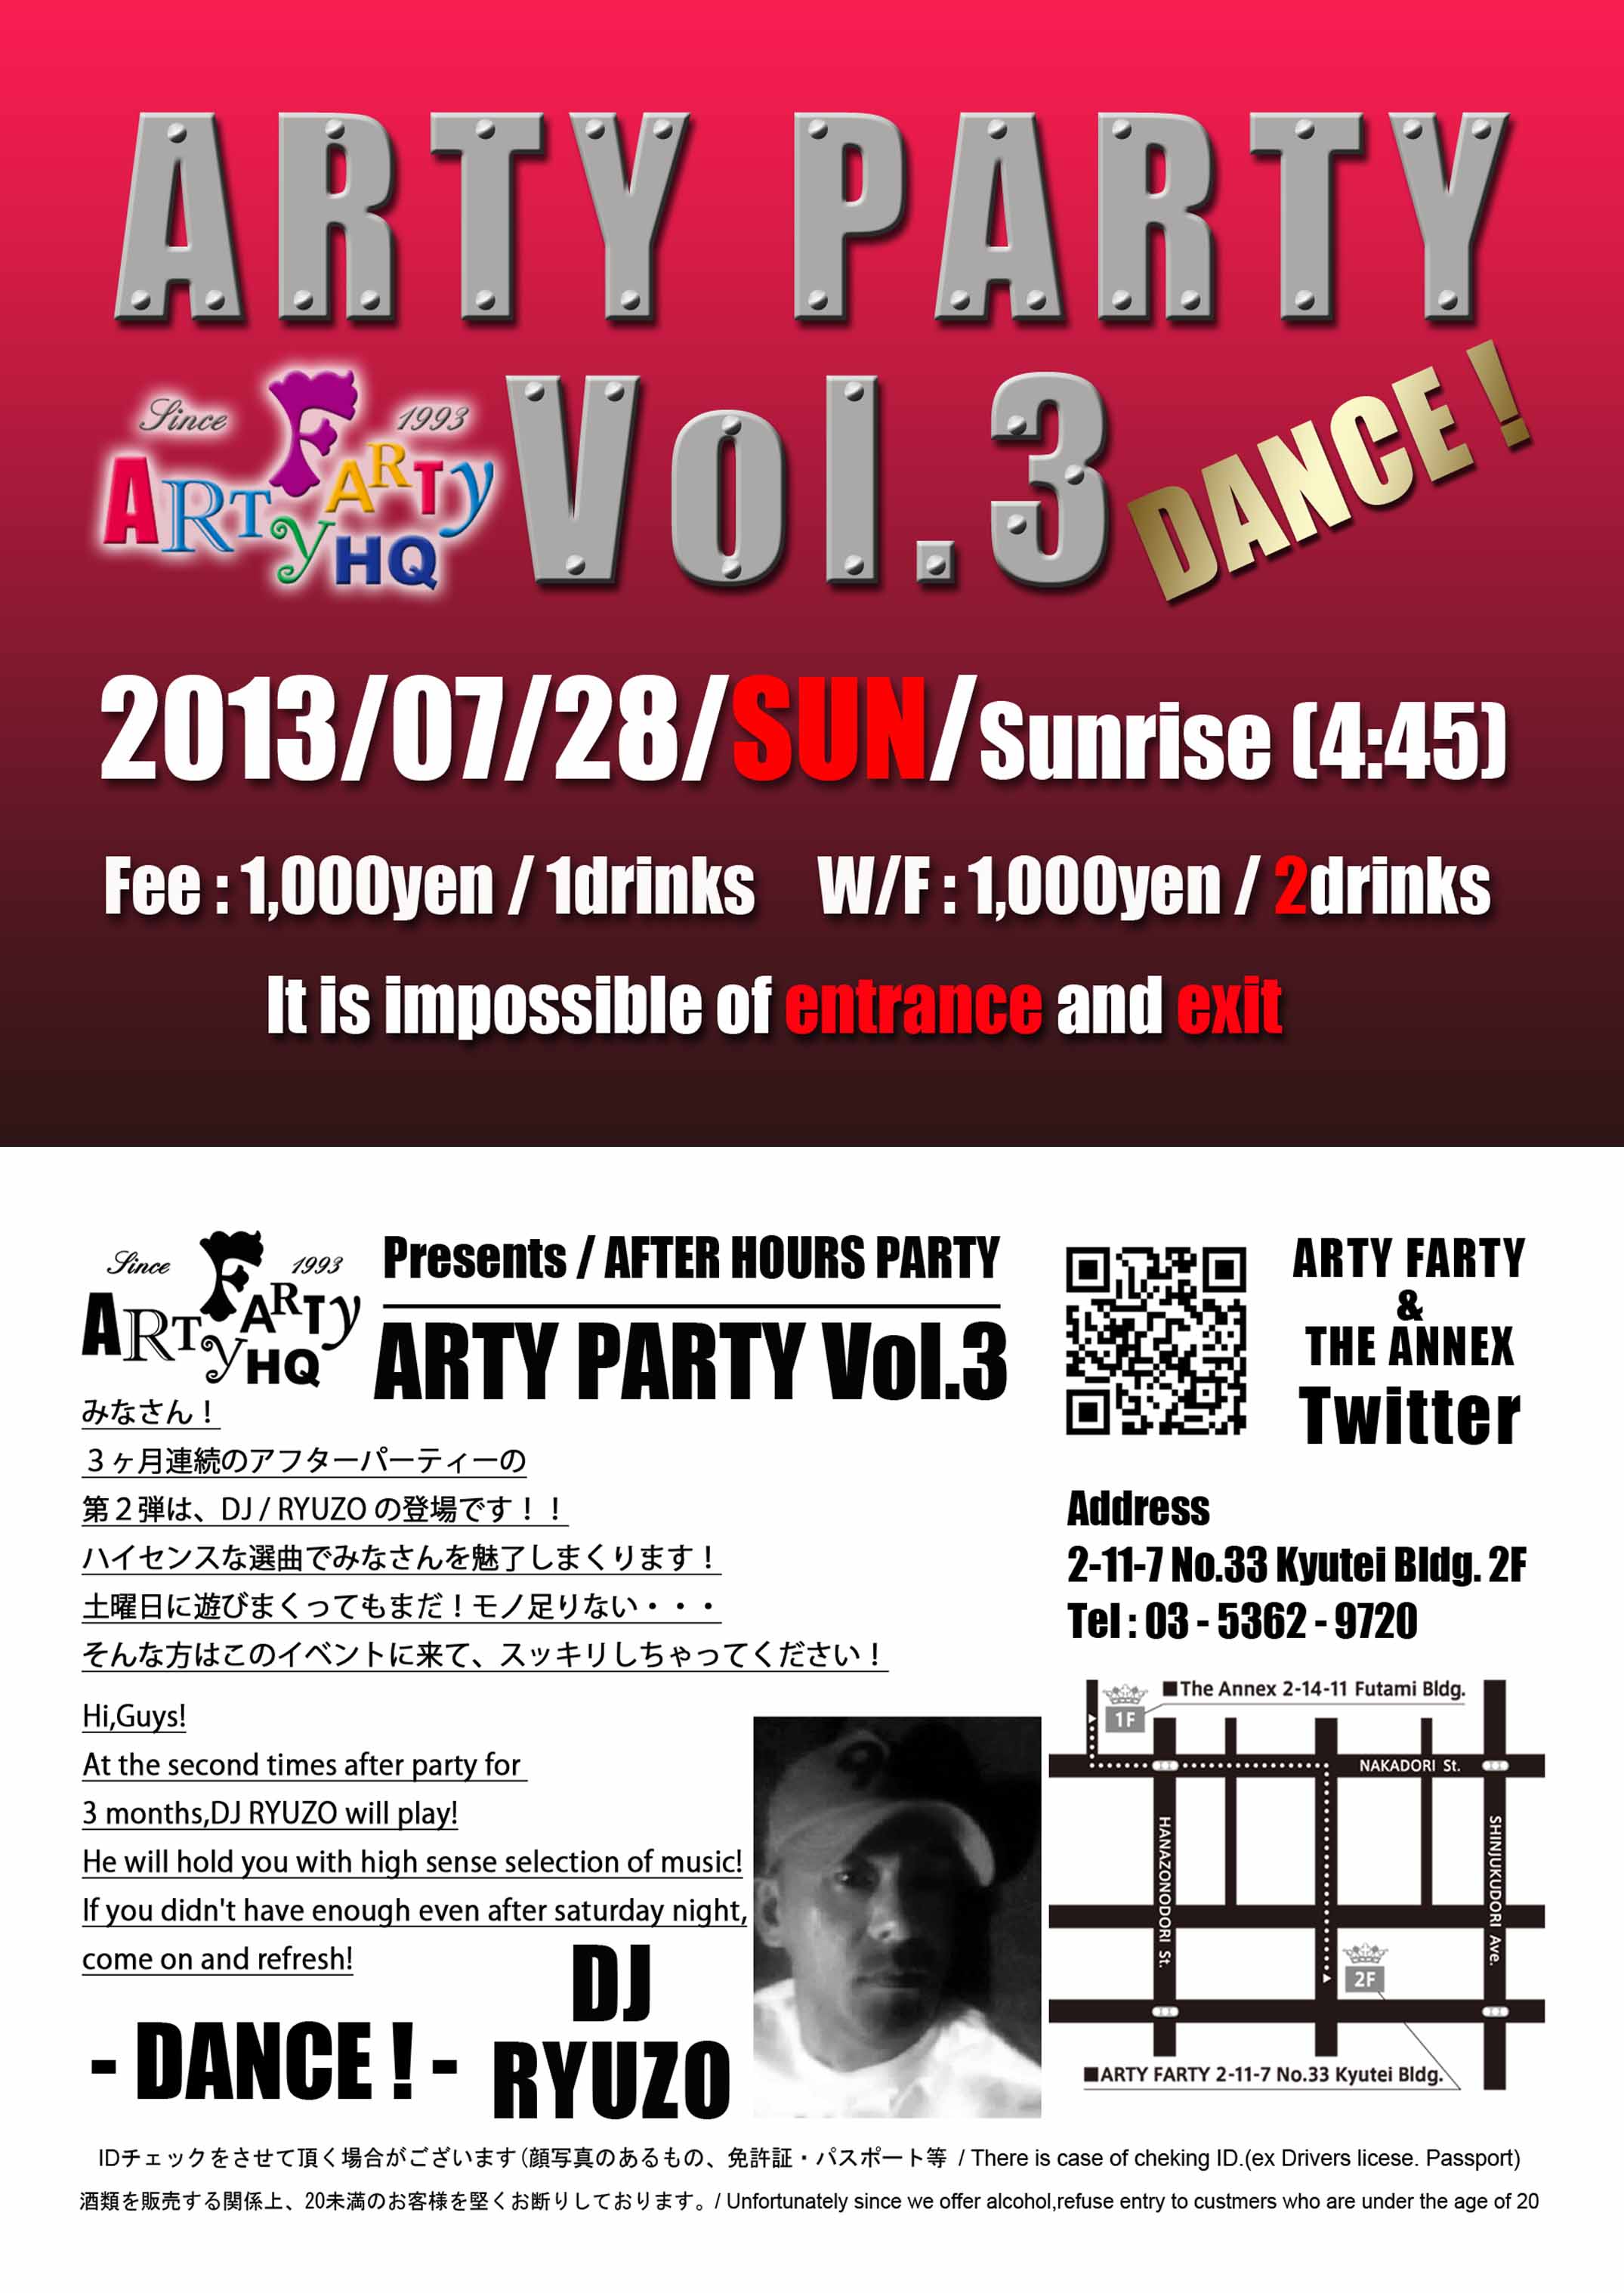 AFTER HOURS PARTY “ARTY PARTY” Vol.3 2150x3035 390.4kb